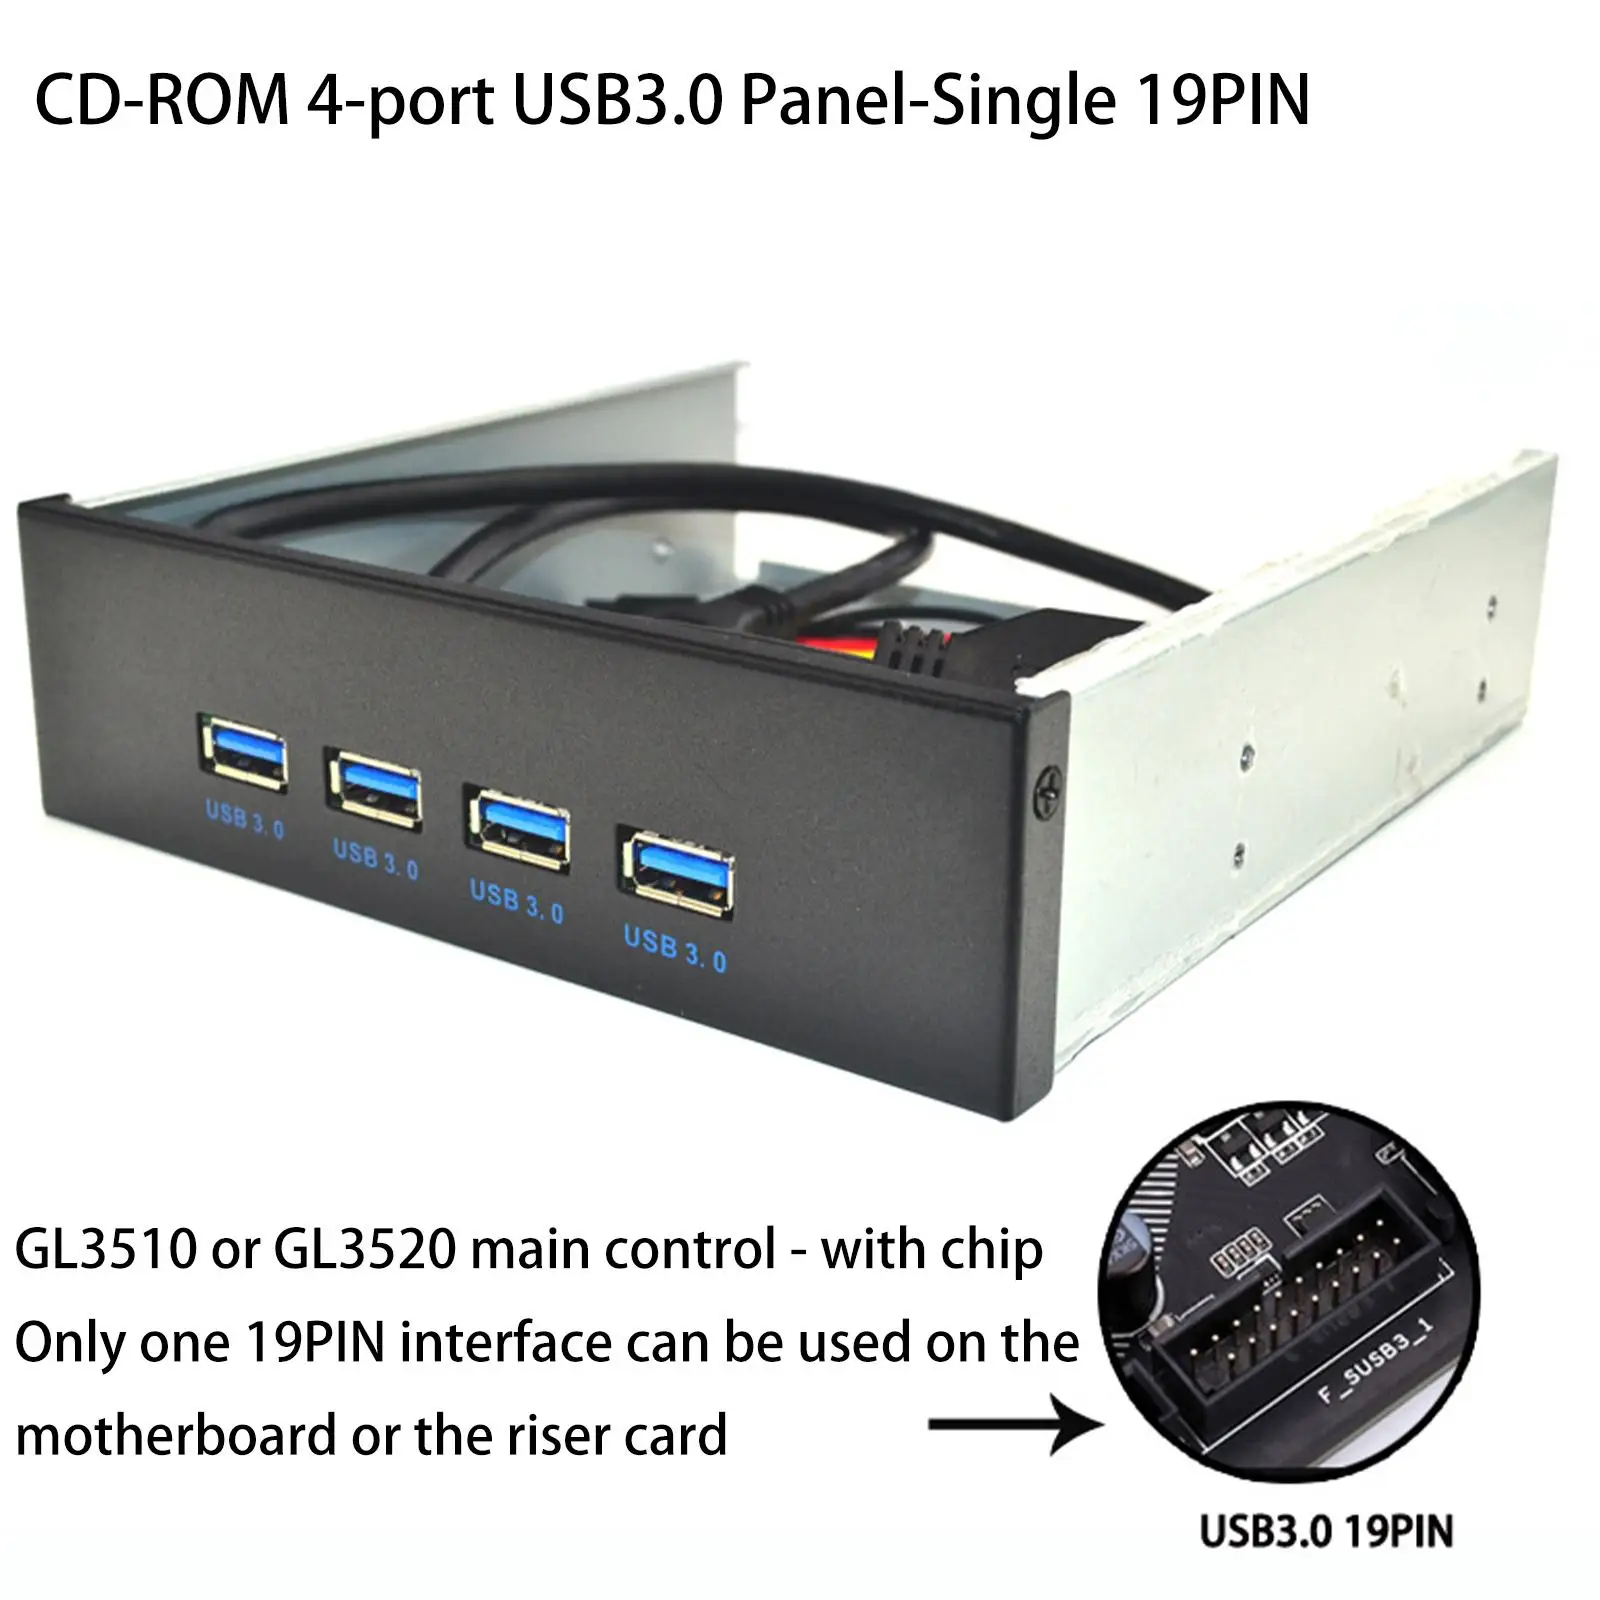 5.25 inch Optical Drive Front Panel 4 Ports USB 3.0 High Speed USB 3.0 Hub for PC